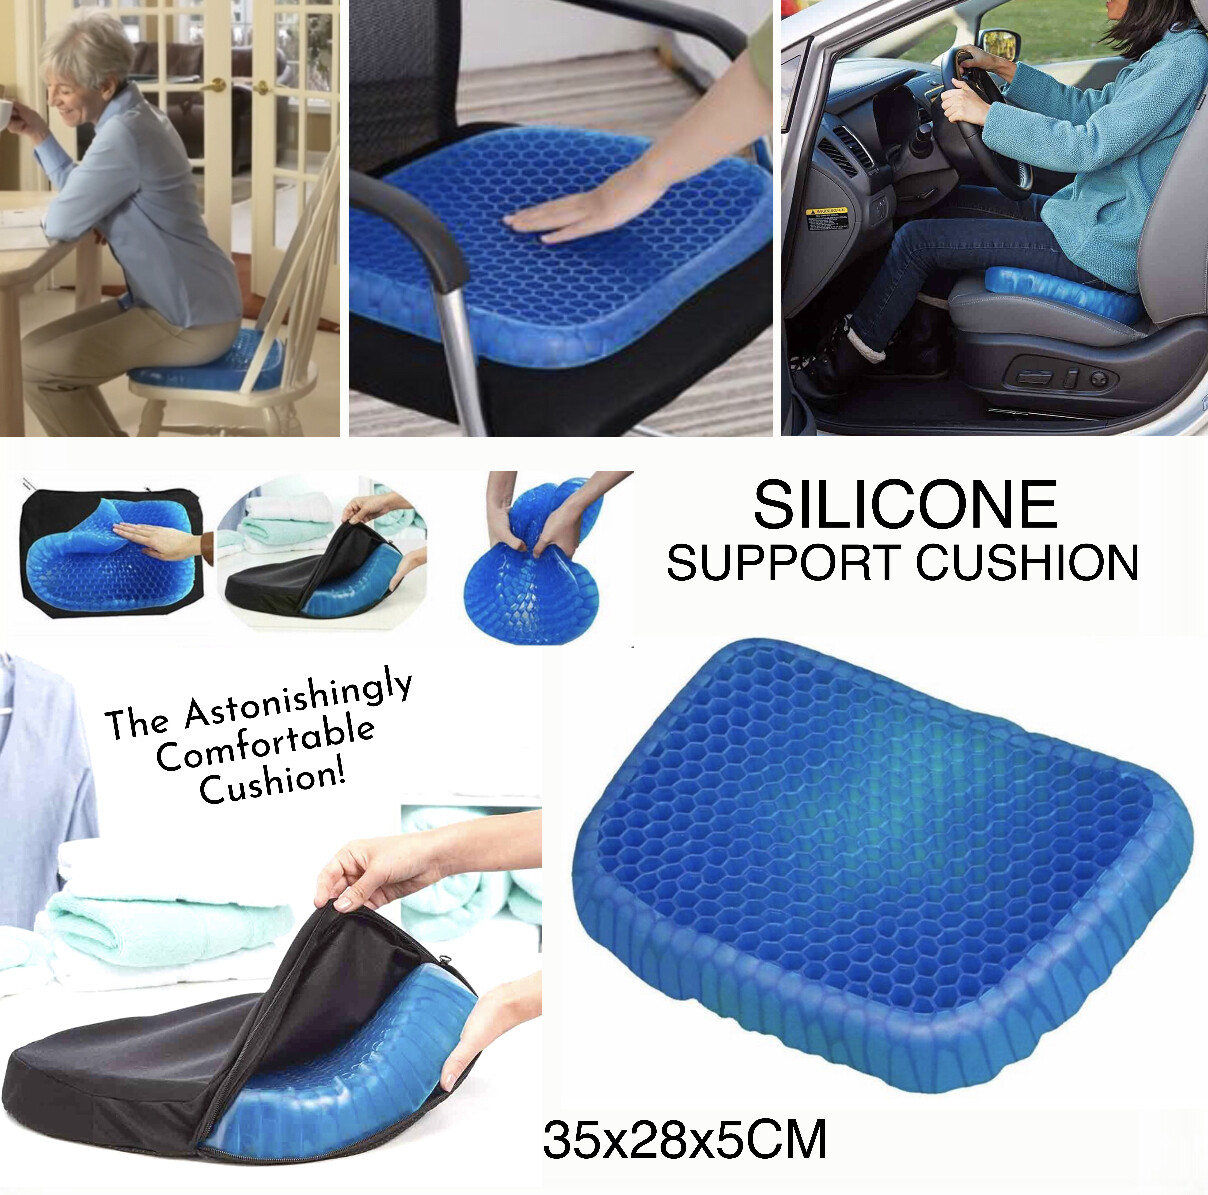 Silicone Support Cushion